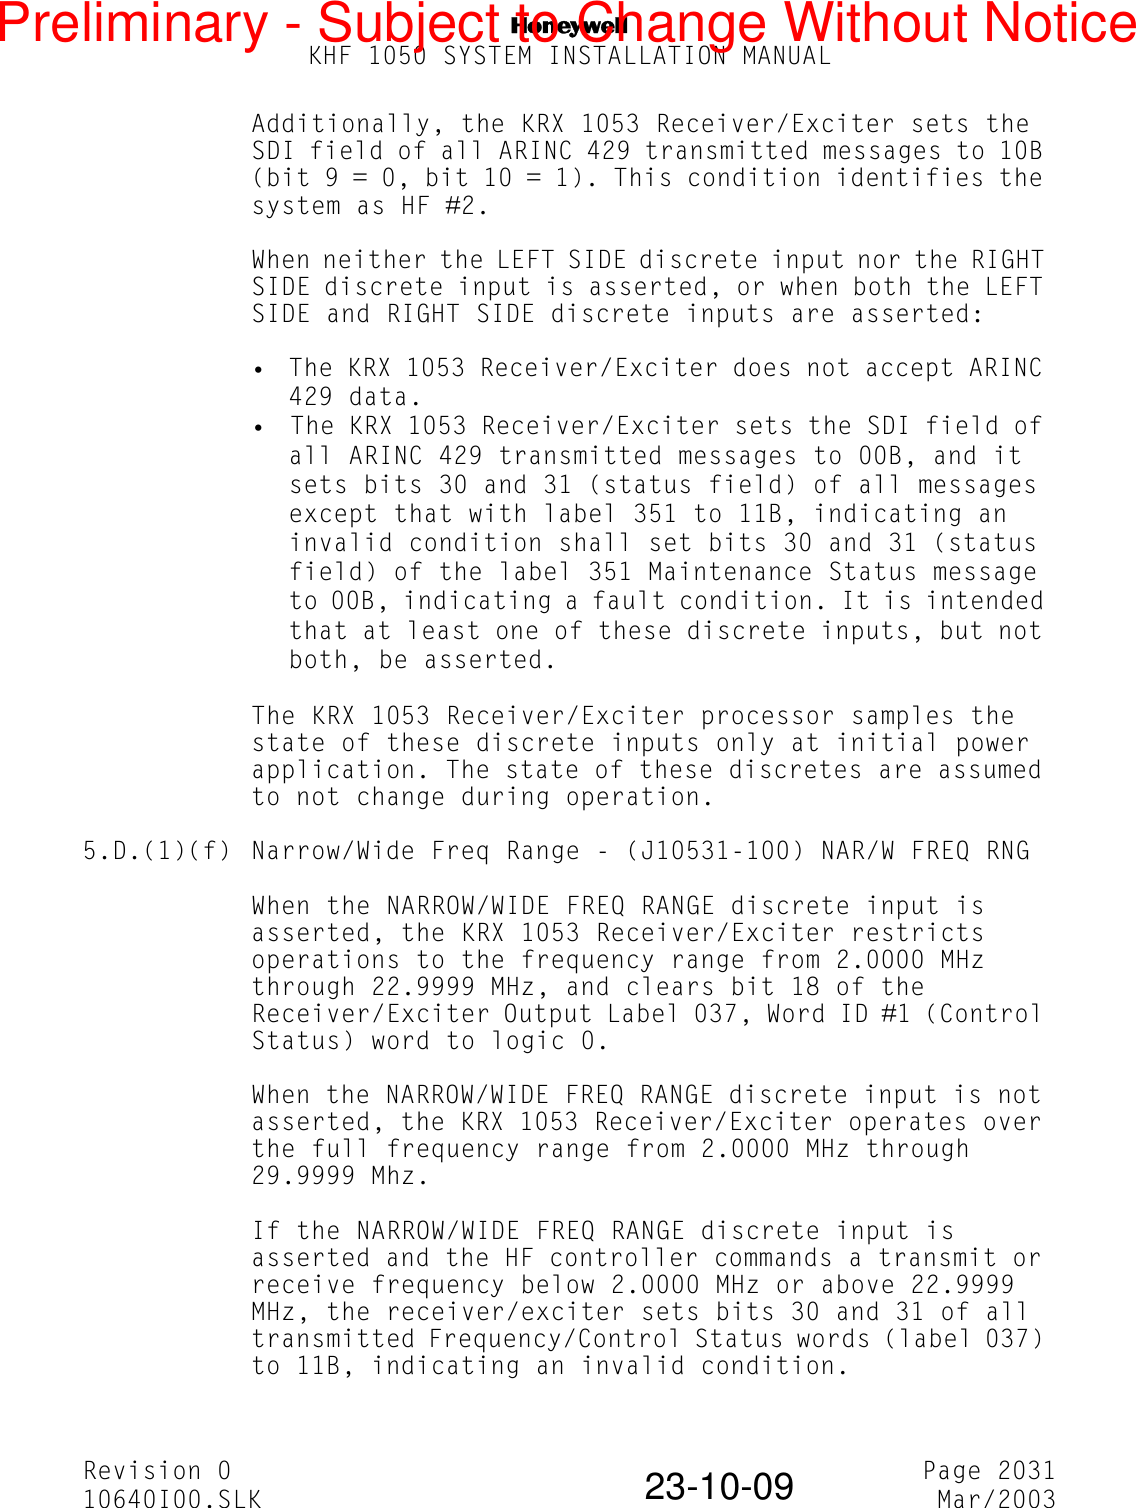 NKHF 1050 SYSTEM INSTALLATION MANUALRevision 0 Page 203110640I00.SLK Mar/200323-10-09Additionally, the KRX 1053 Receiver/Exciter sets the SDI field of all ARINC 429 transmitted messages to 10B (bit 9 = 0, bit 10 = 1). This condition identifies the system as HF #2.When neither the LEFT SIDE discrete input nor the RIGHT SIDE discrete input is asserted, or when both the LEFT SIDE and RIGHT SIDE discrete inputs are asserted:• The KRX 1053 Receiver/Exciter does not accept ARINC 429 data.• The KRX 1053 Receiver/Exciter sets the SDI field of all ARINC 429 transmitted messages to 00B, and it sets bits 30 and 31 (status field) of all messages except that with label 351 to 11B, indicating an invalid condition shall set bits 30 and 31 (status field) of the label 351 Maintenance Status message to 00B, indicating a fault condition. It is intended that at least one of these discrete inputs, but not both, be asserted.The KRX 1053 Receiver/Exciter processor samples the state of these discrete inputs only at initial power application. The state of these discretes are assumed to not change during operation.5.D.(1)(f) Narrow/Wide Freq Range - (J10531-100) NAR/W FREQ RNGWhen the NARROW/WIDE FREQ RANGE discrete input is asserted, the KRX 1053 Receiver/Exciter restricts operations to the frequency range from 2.0000 MHz through 22.9999 MHz, and clears bit 18 of the Receiver/Exciter Output Label 037, Word ID #1 (Control Status) word to logic 0.When the NARROW/WIDE FREQ RANGE discrete input is not asserted, the KRX 1053 Receiver/Exciter operates over the full frequency range from 2.0000 MHz through 29.9999 Mhz.If the NARROW/WIDE FREQ RANGE discrete input is asserted and the HF controller commands a transmit or receive frequency below 2.0000 MHz or above 22.9999 MHz, the receiver/exciter sets bits 30 and 31 of all transmitted Frequency/Control Status words (label 037) to 11B, indicating an invalid condition.Preliminary - Subject to Change Without Notice